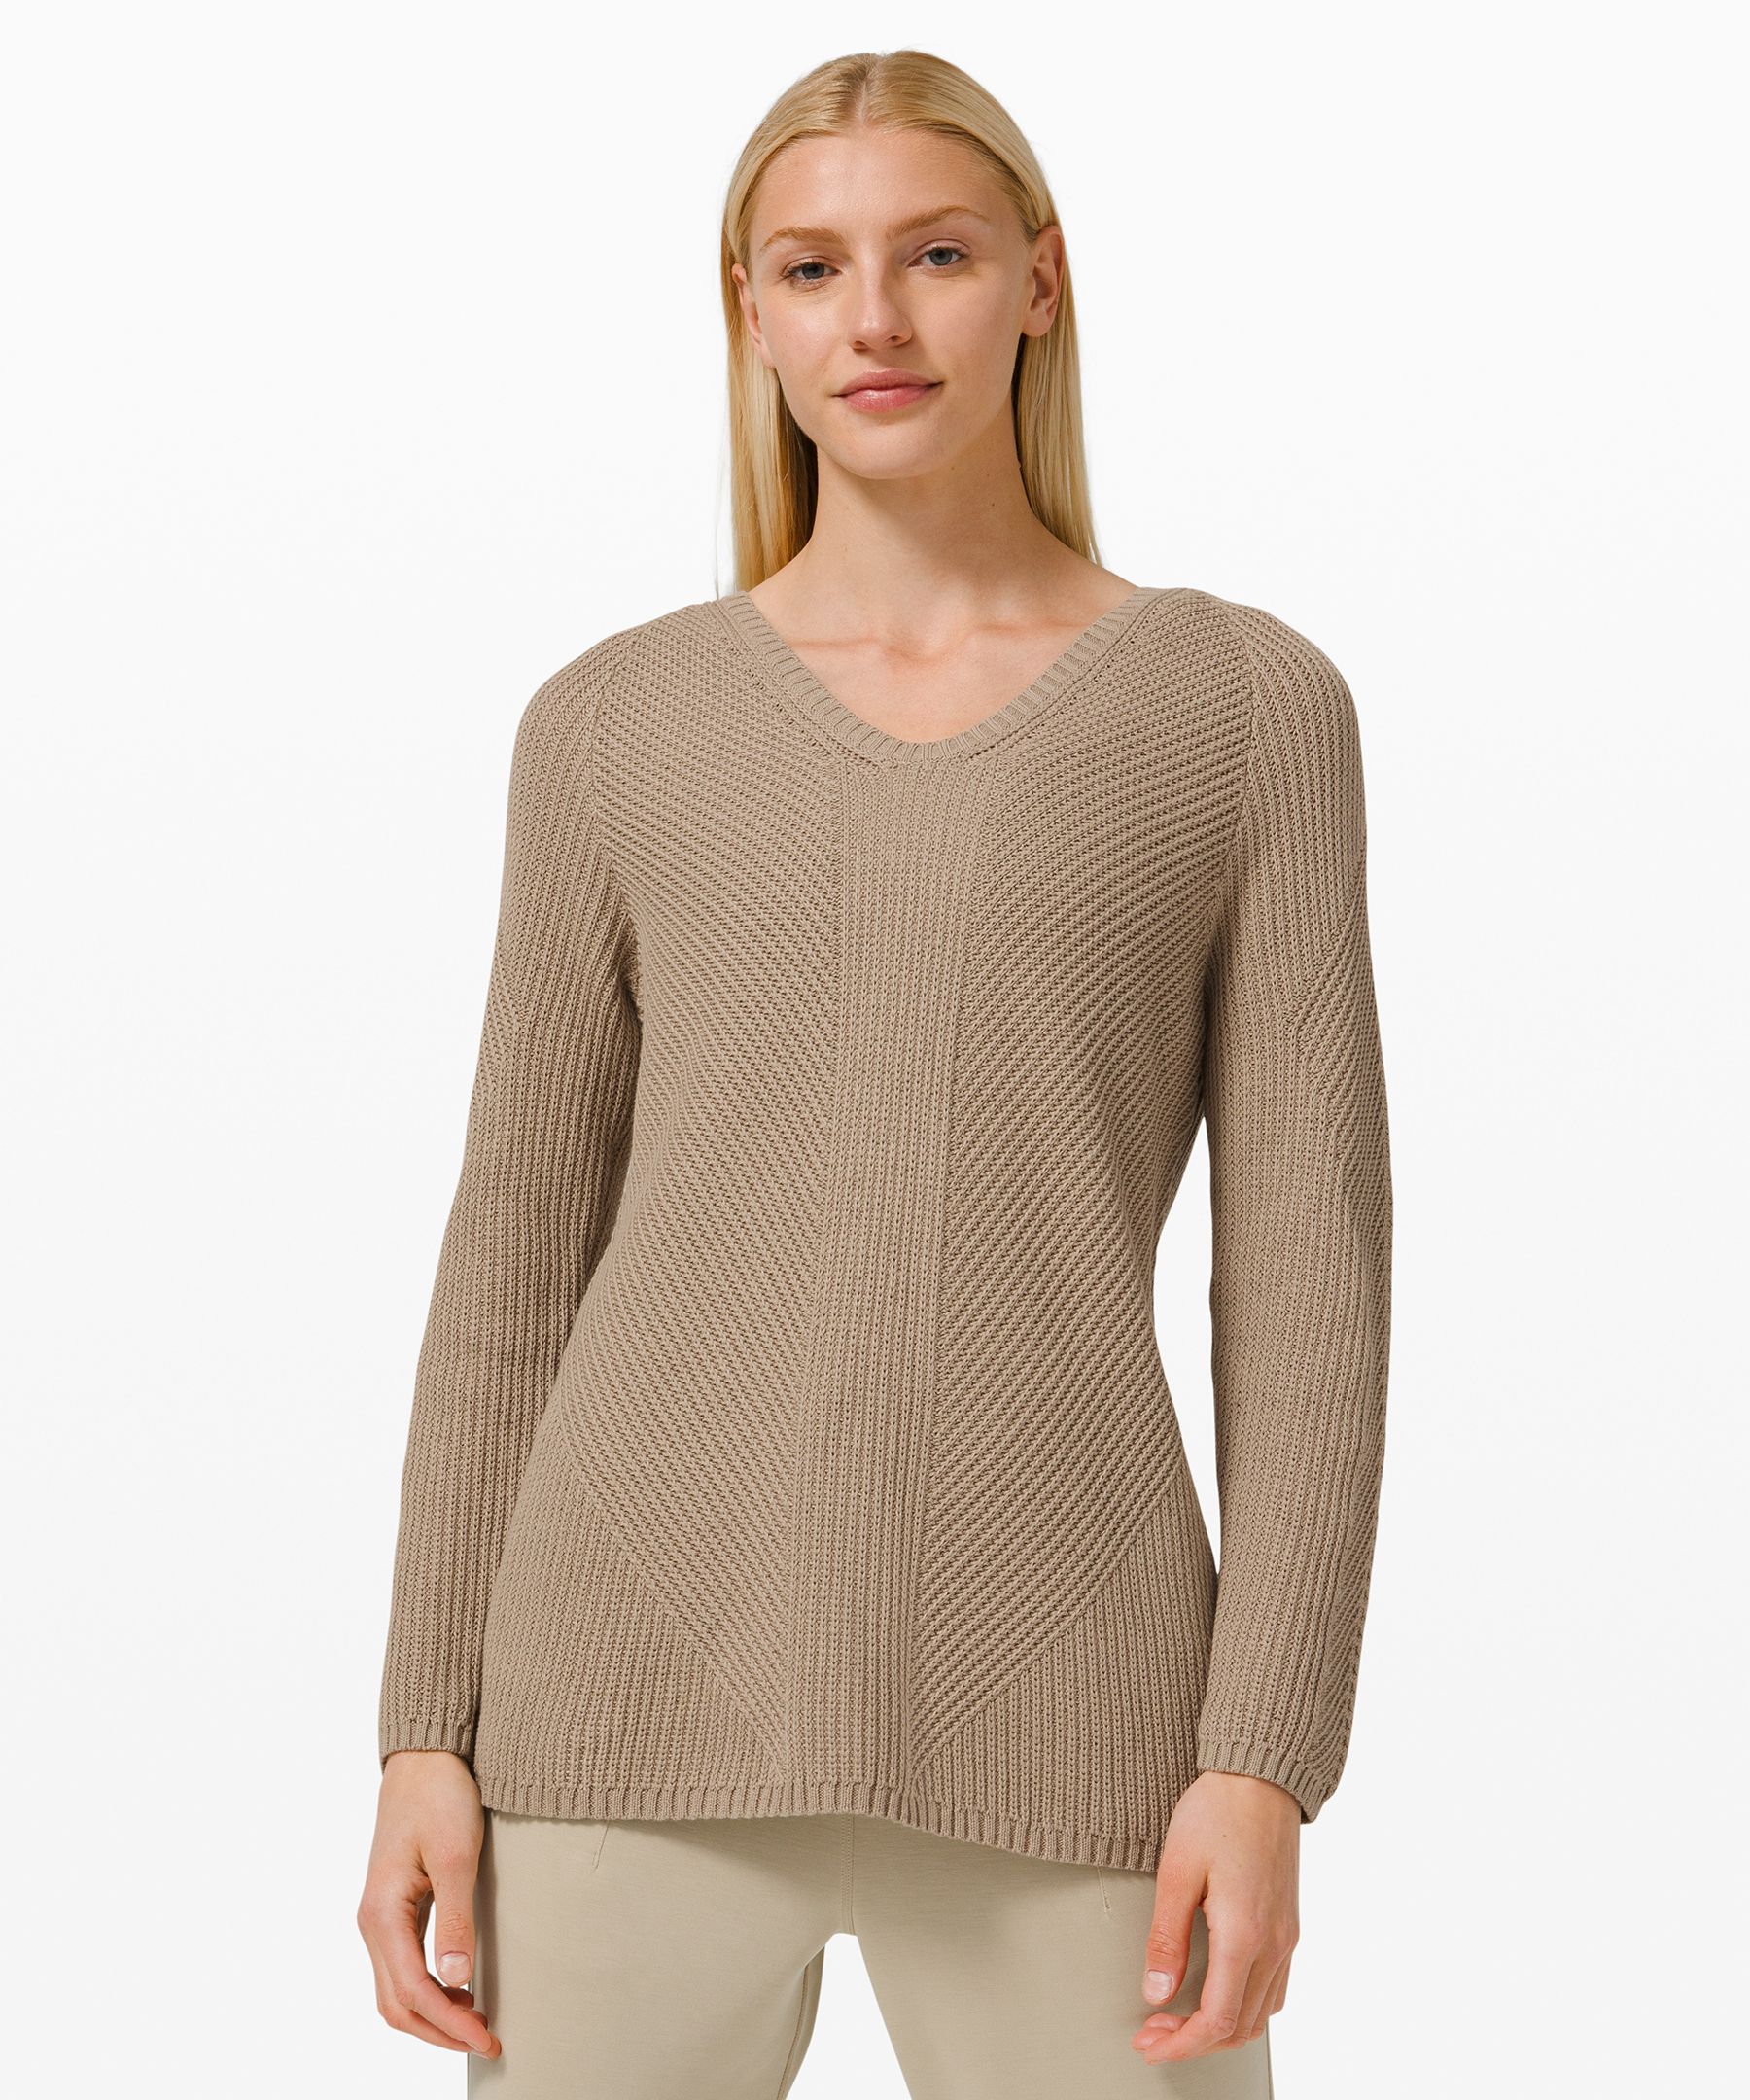 Lululemon Knit Blend Textured Pulllover In Heathered Trench